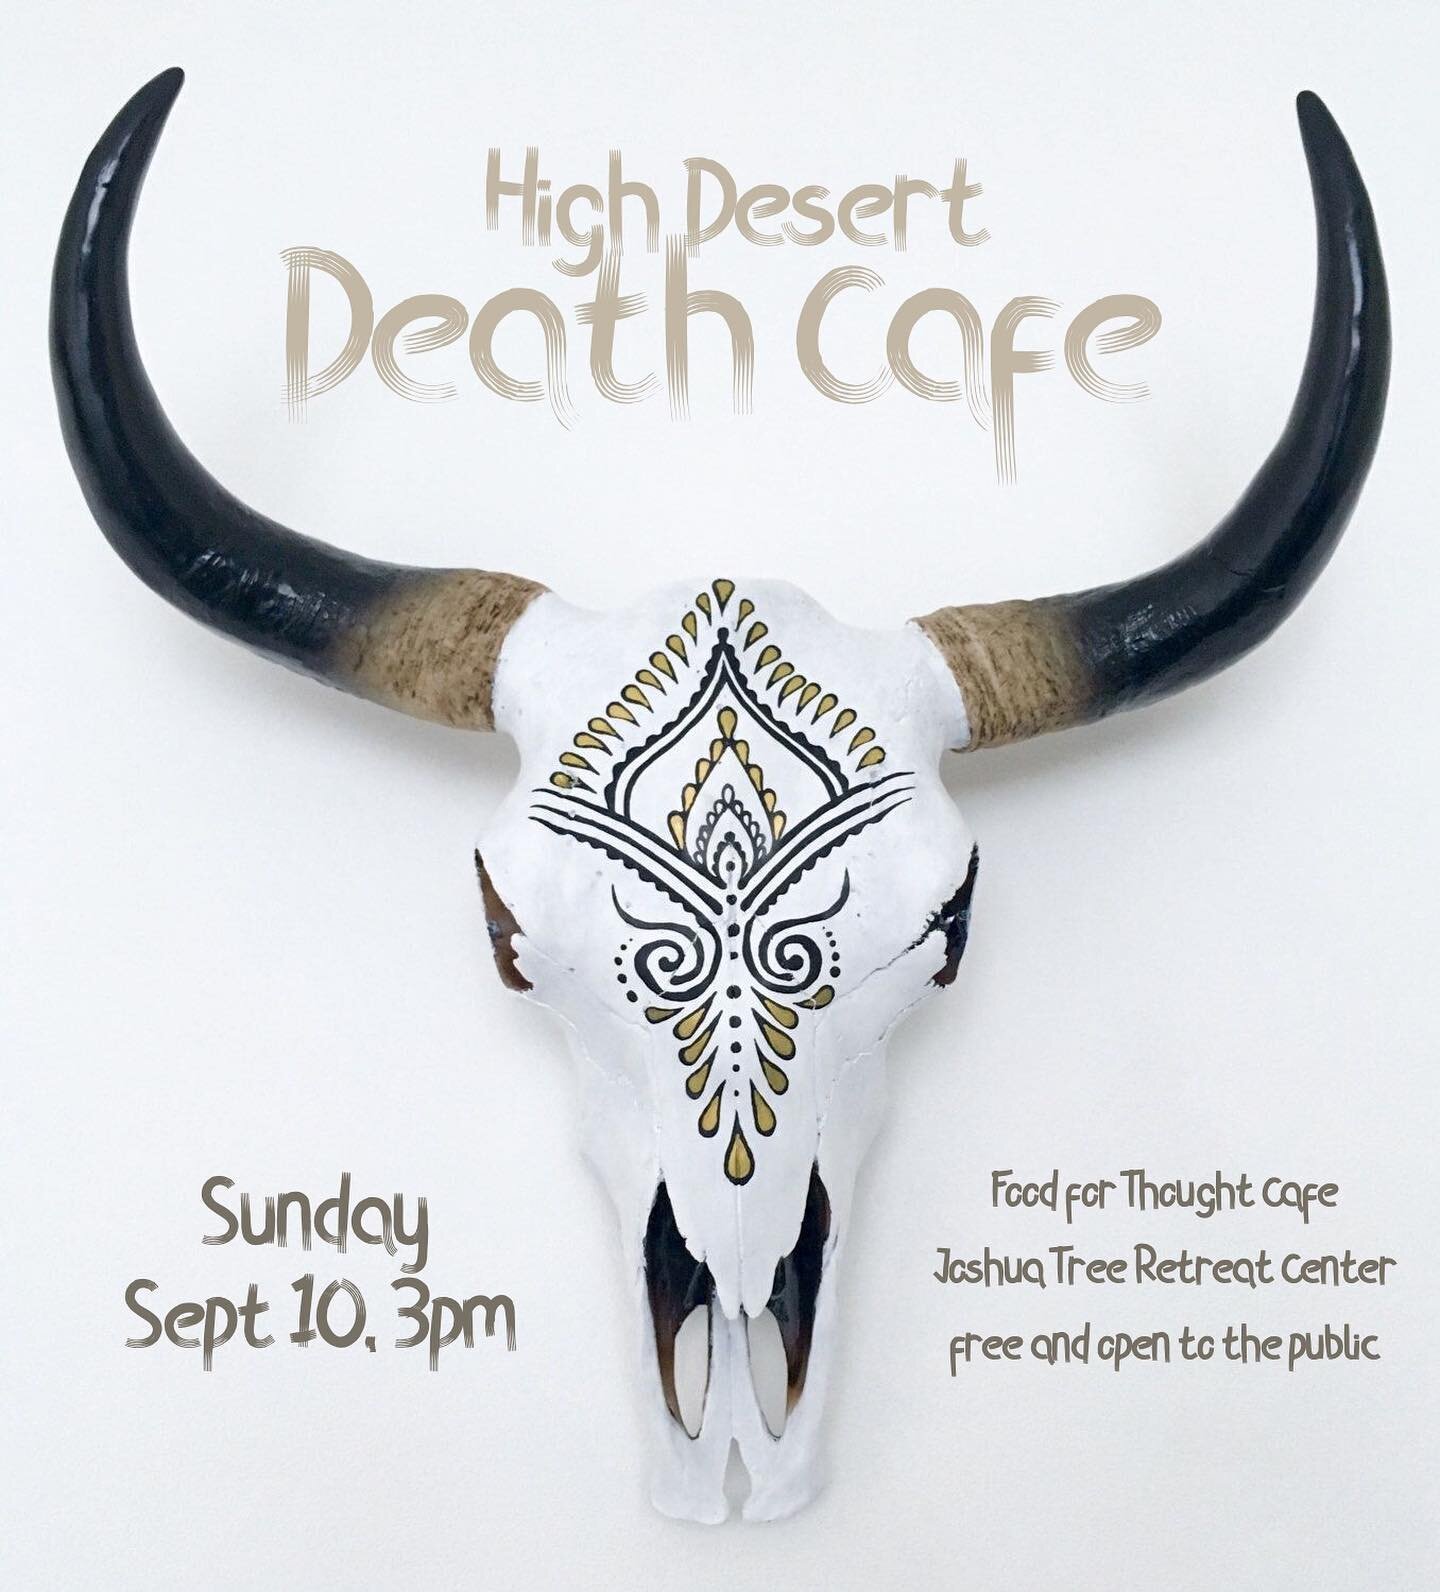 Join the Hi Dez community of folks willing to discuss Death,
Sunday Sept 10, 3pm 
Food for Thought Cafe @foodforthoughtcafejt 
Joshua Tree Retreat Center @jtretreatcenter 

This a group directed conversation about the practical, philosophical and imp